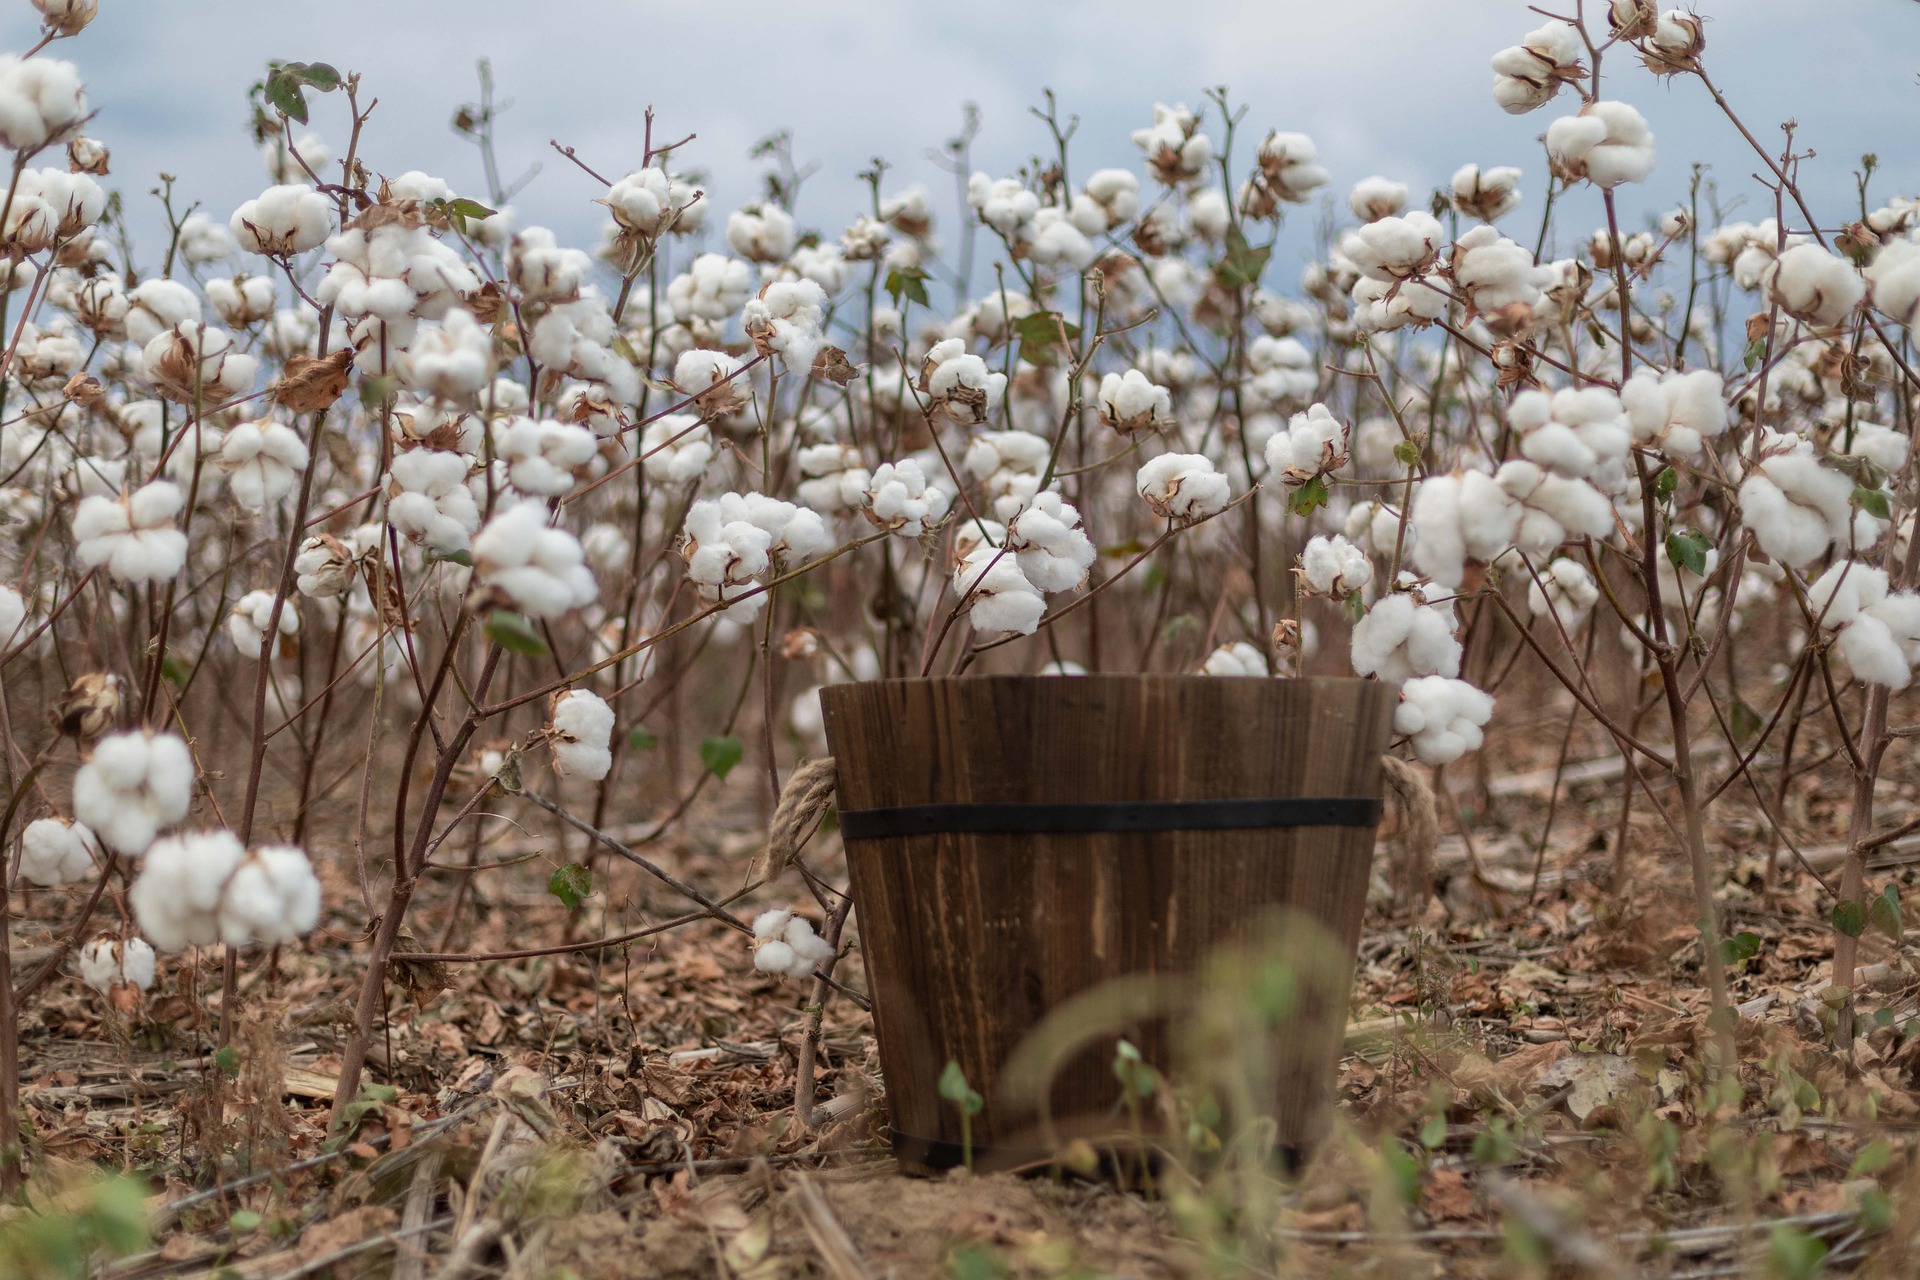 Agriculture In Iran: Within the upcoming cropping year (1400), 98,000 kg of cotton will be produced as the result of cultivations of Gossypium farmland in Iran. 